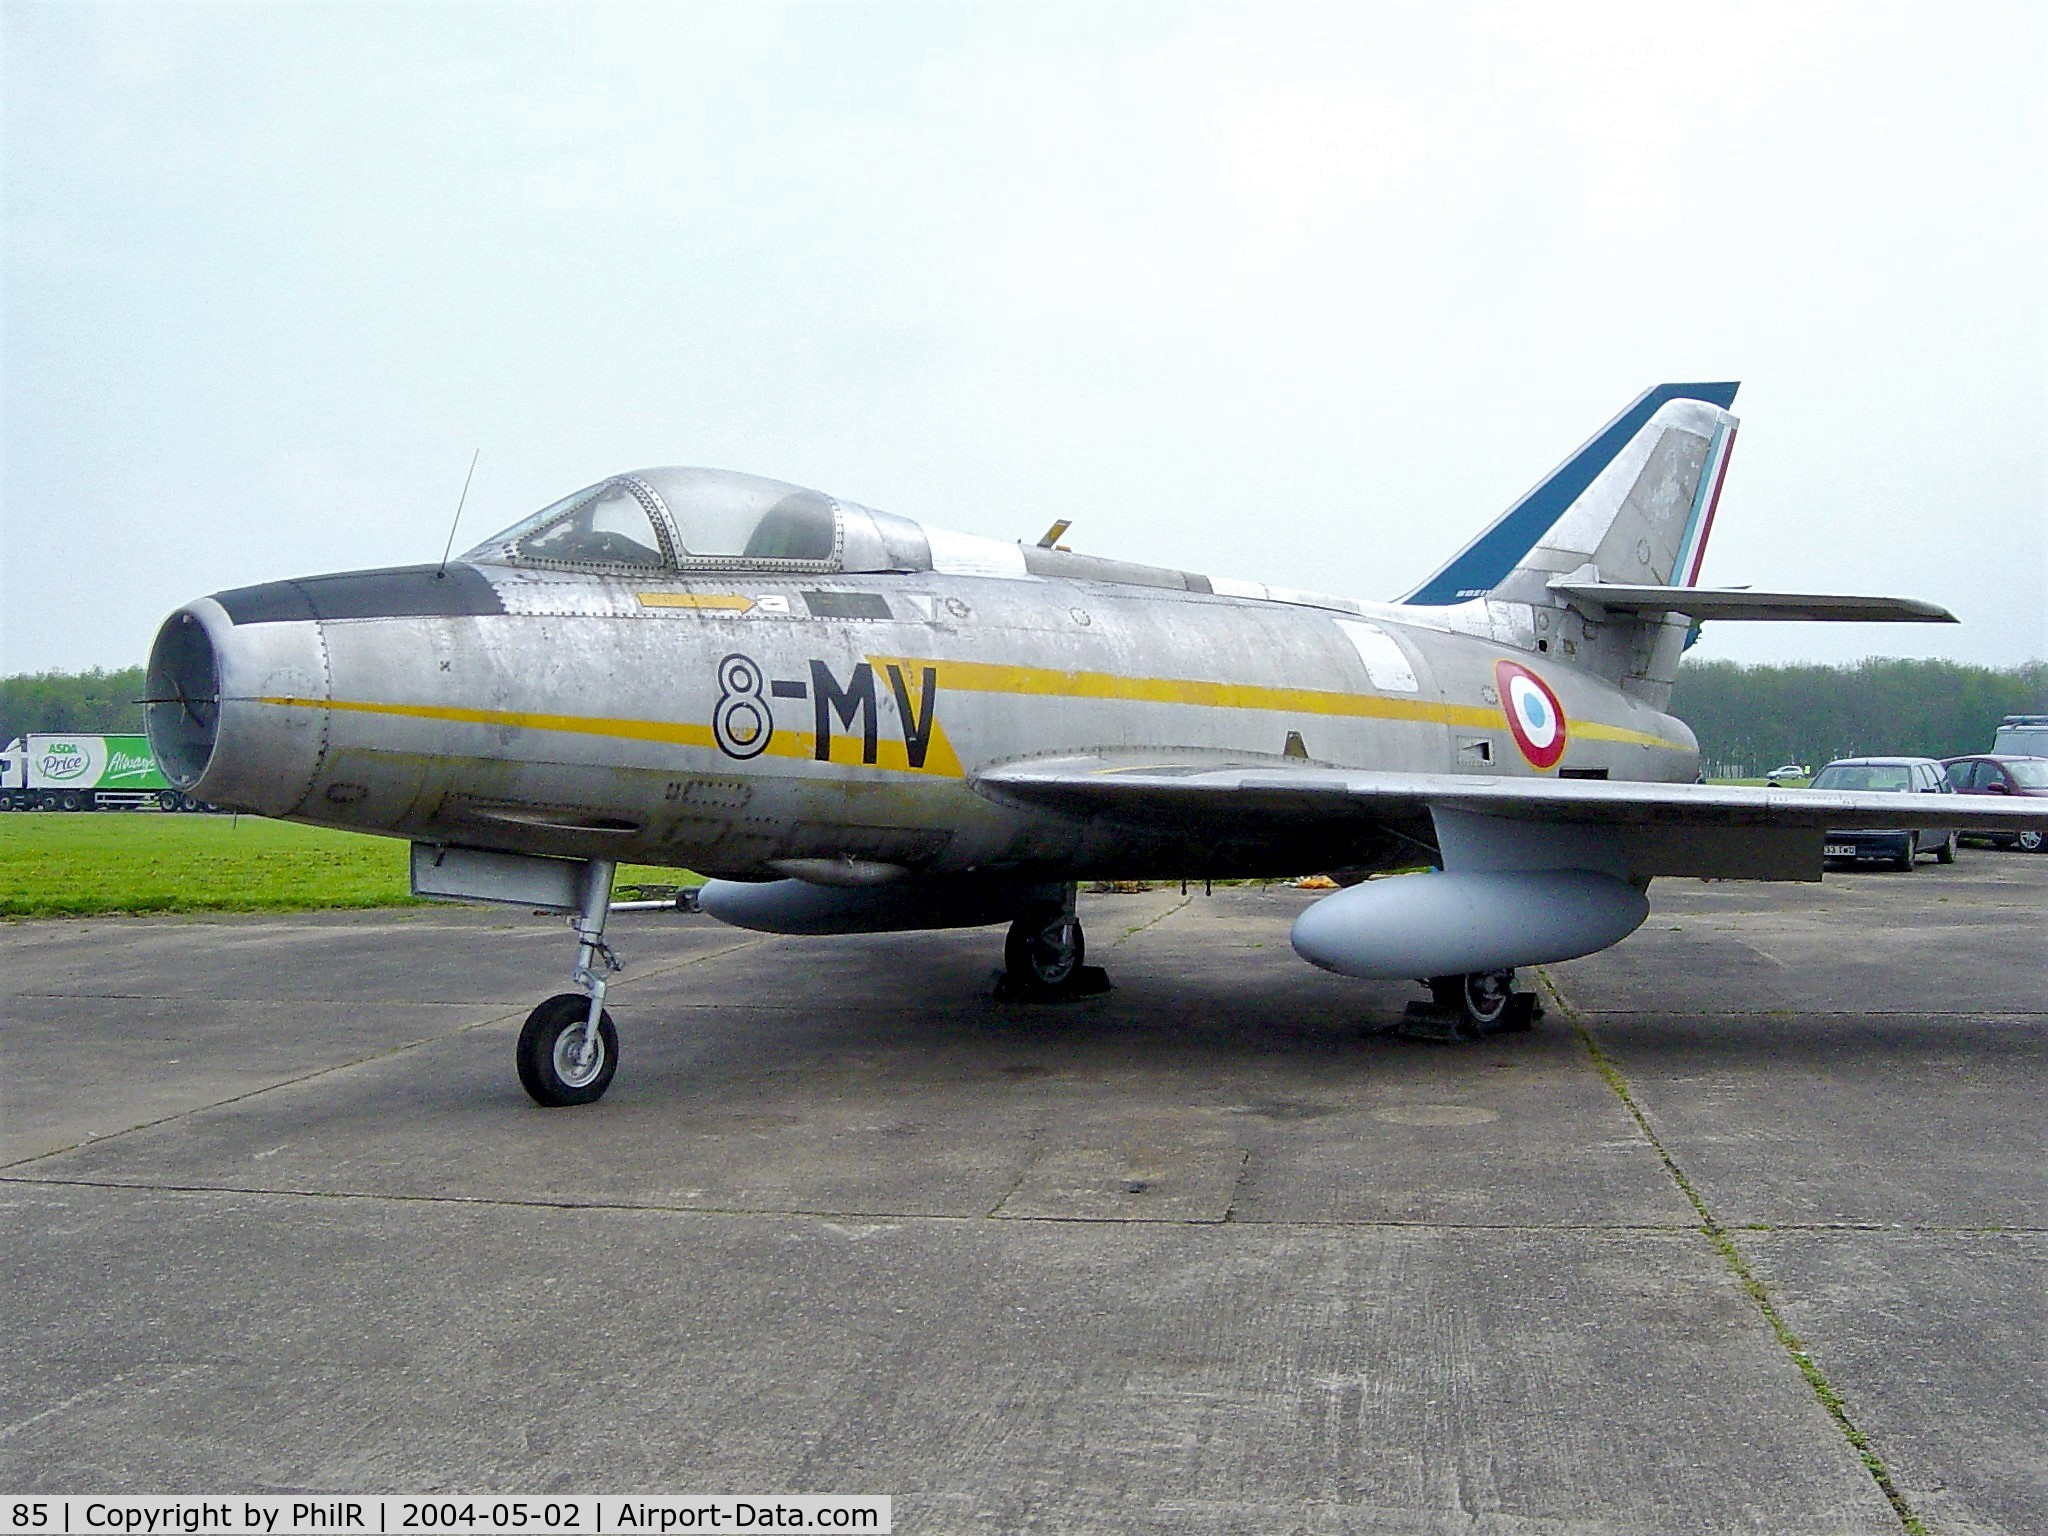 85, Dassault Mystère IVA C/N 85, Mystere lV on display at the May 2004 Bruntingthorpe Open Day, alas no more.